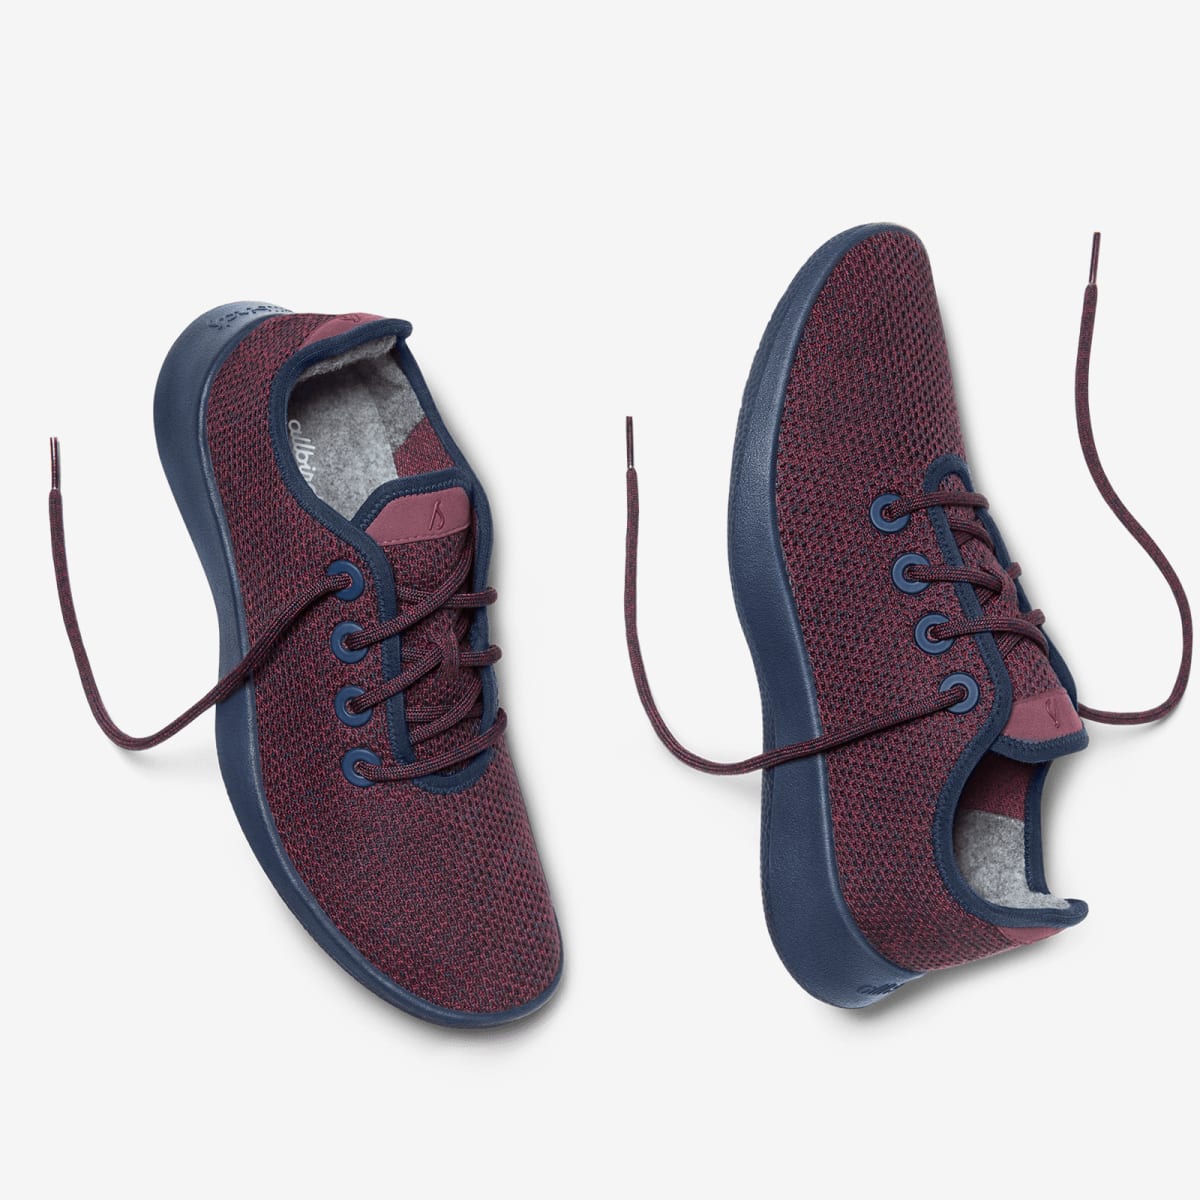 Allbirds Shoes - Women's Tree Runners - LIMITED EDITION: Olympus (Navy Sole)